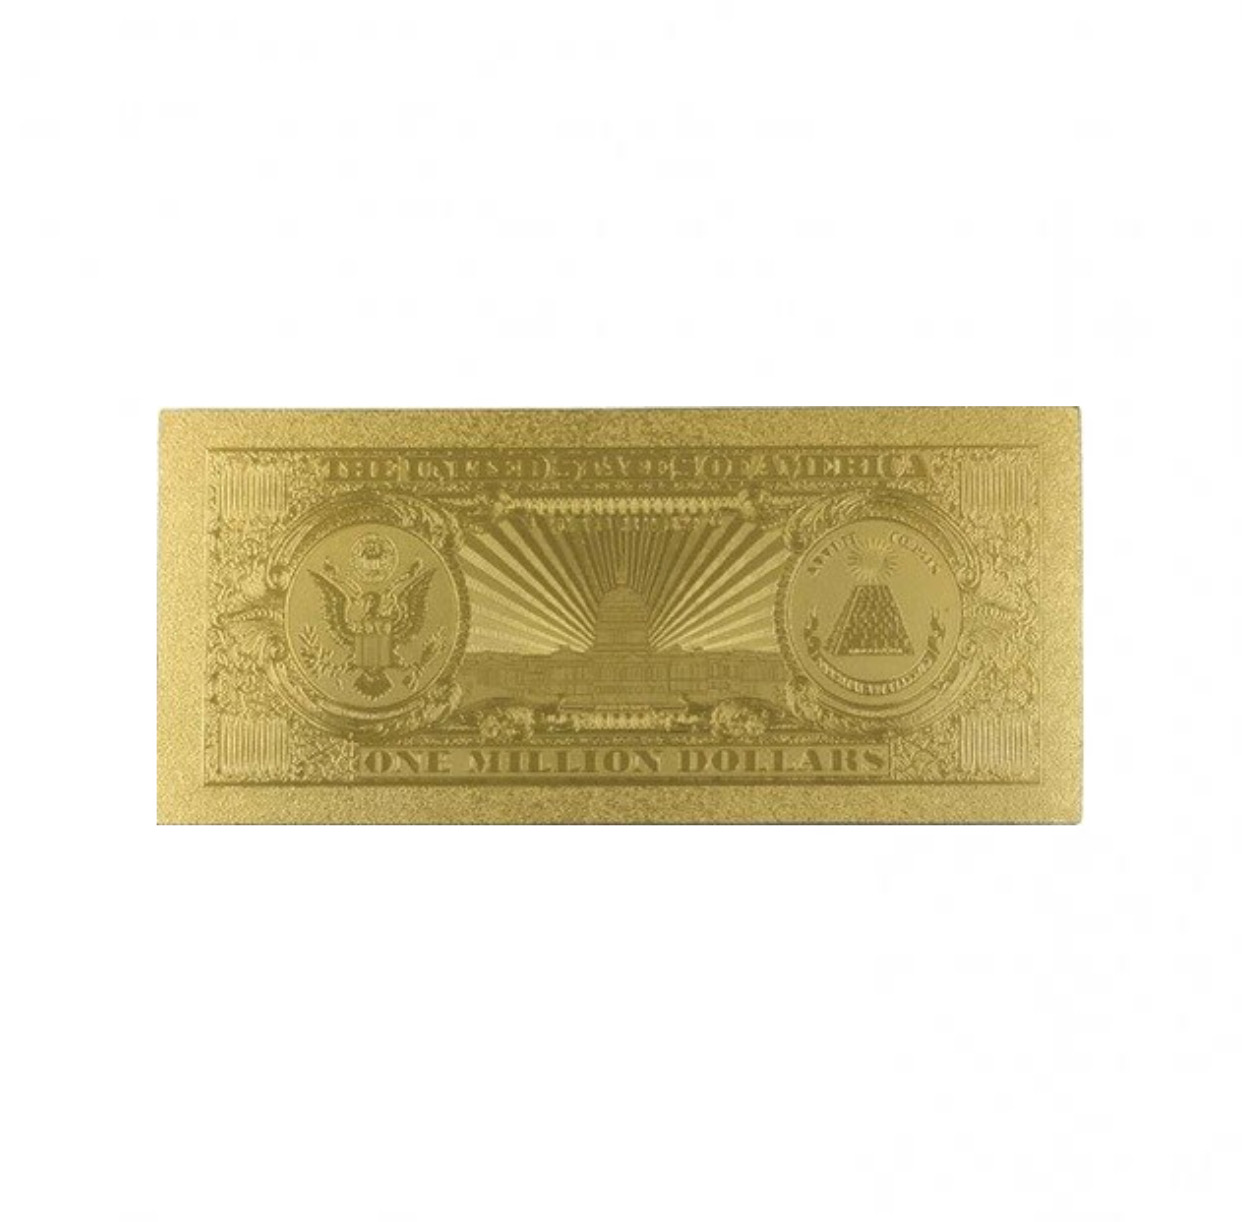 Miss Lady Liberty 1 Million Dollars Original 24K Gold Plated Bill Collectible Banknotes for Decoration 24K Gold and Silver Plated Replica Bills 4